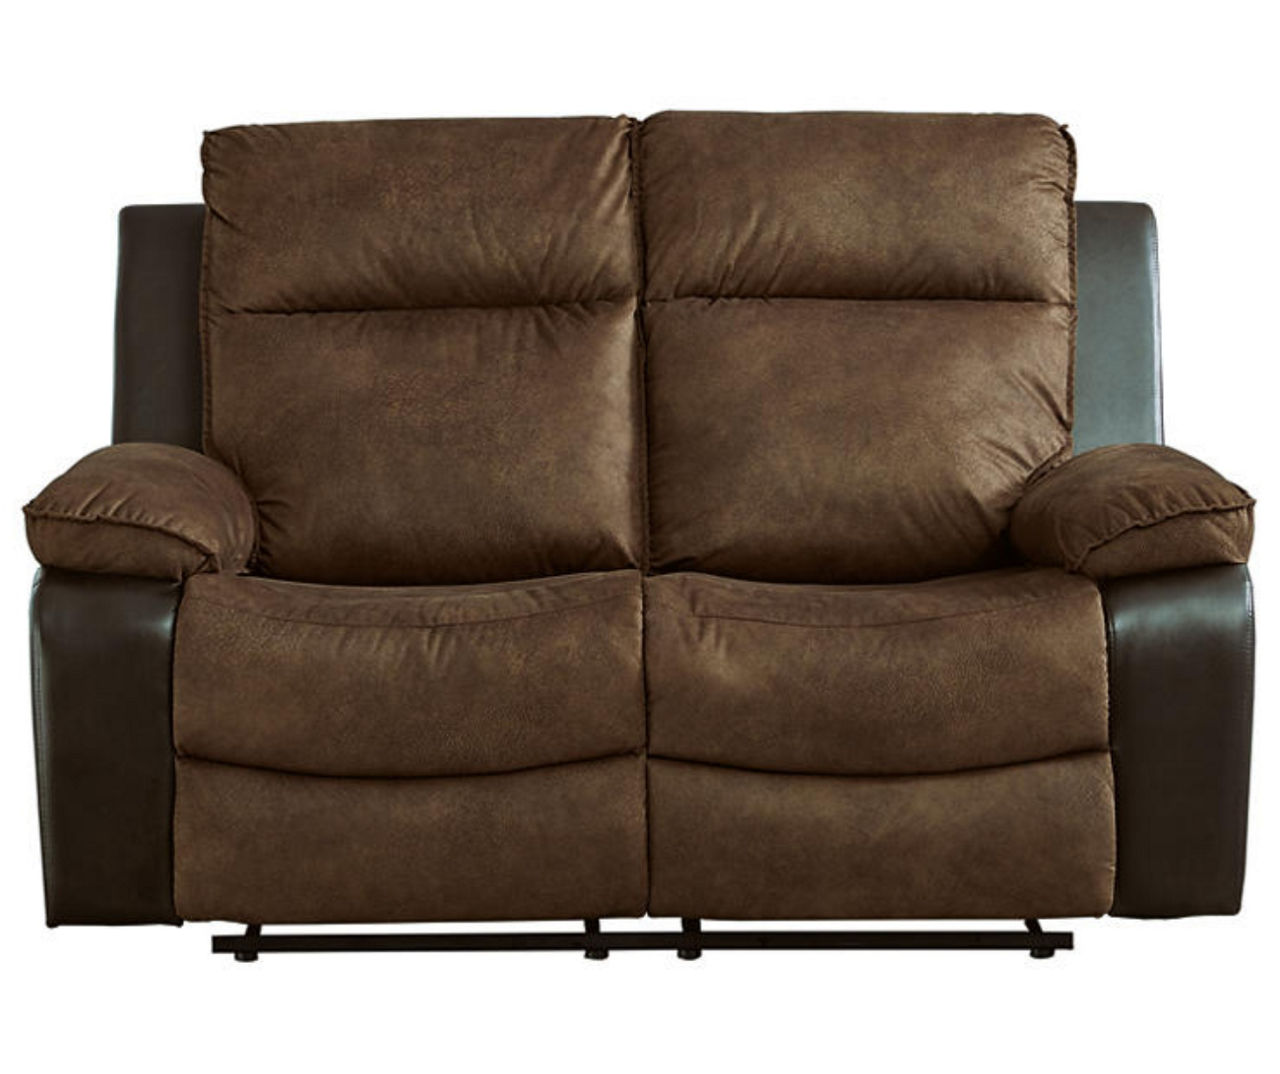 Woodsway Brown Faux Leather Reclining Loveseat